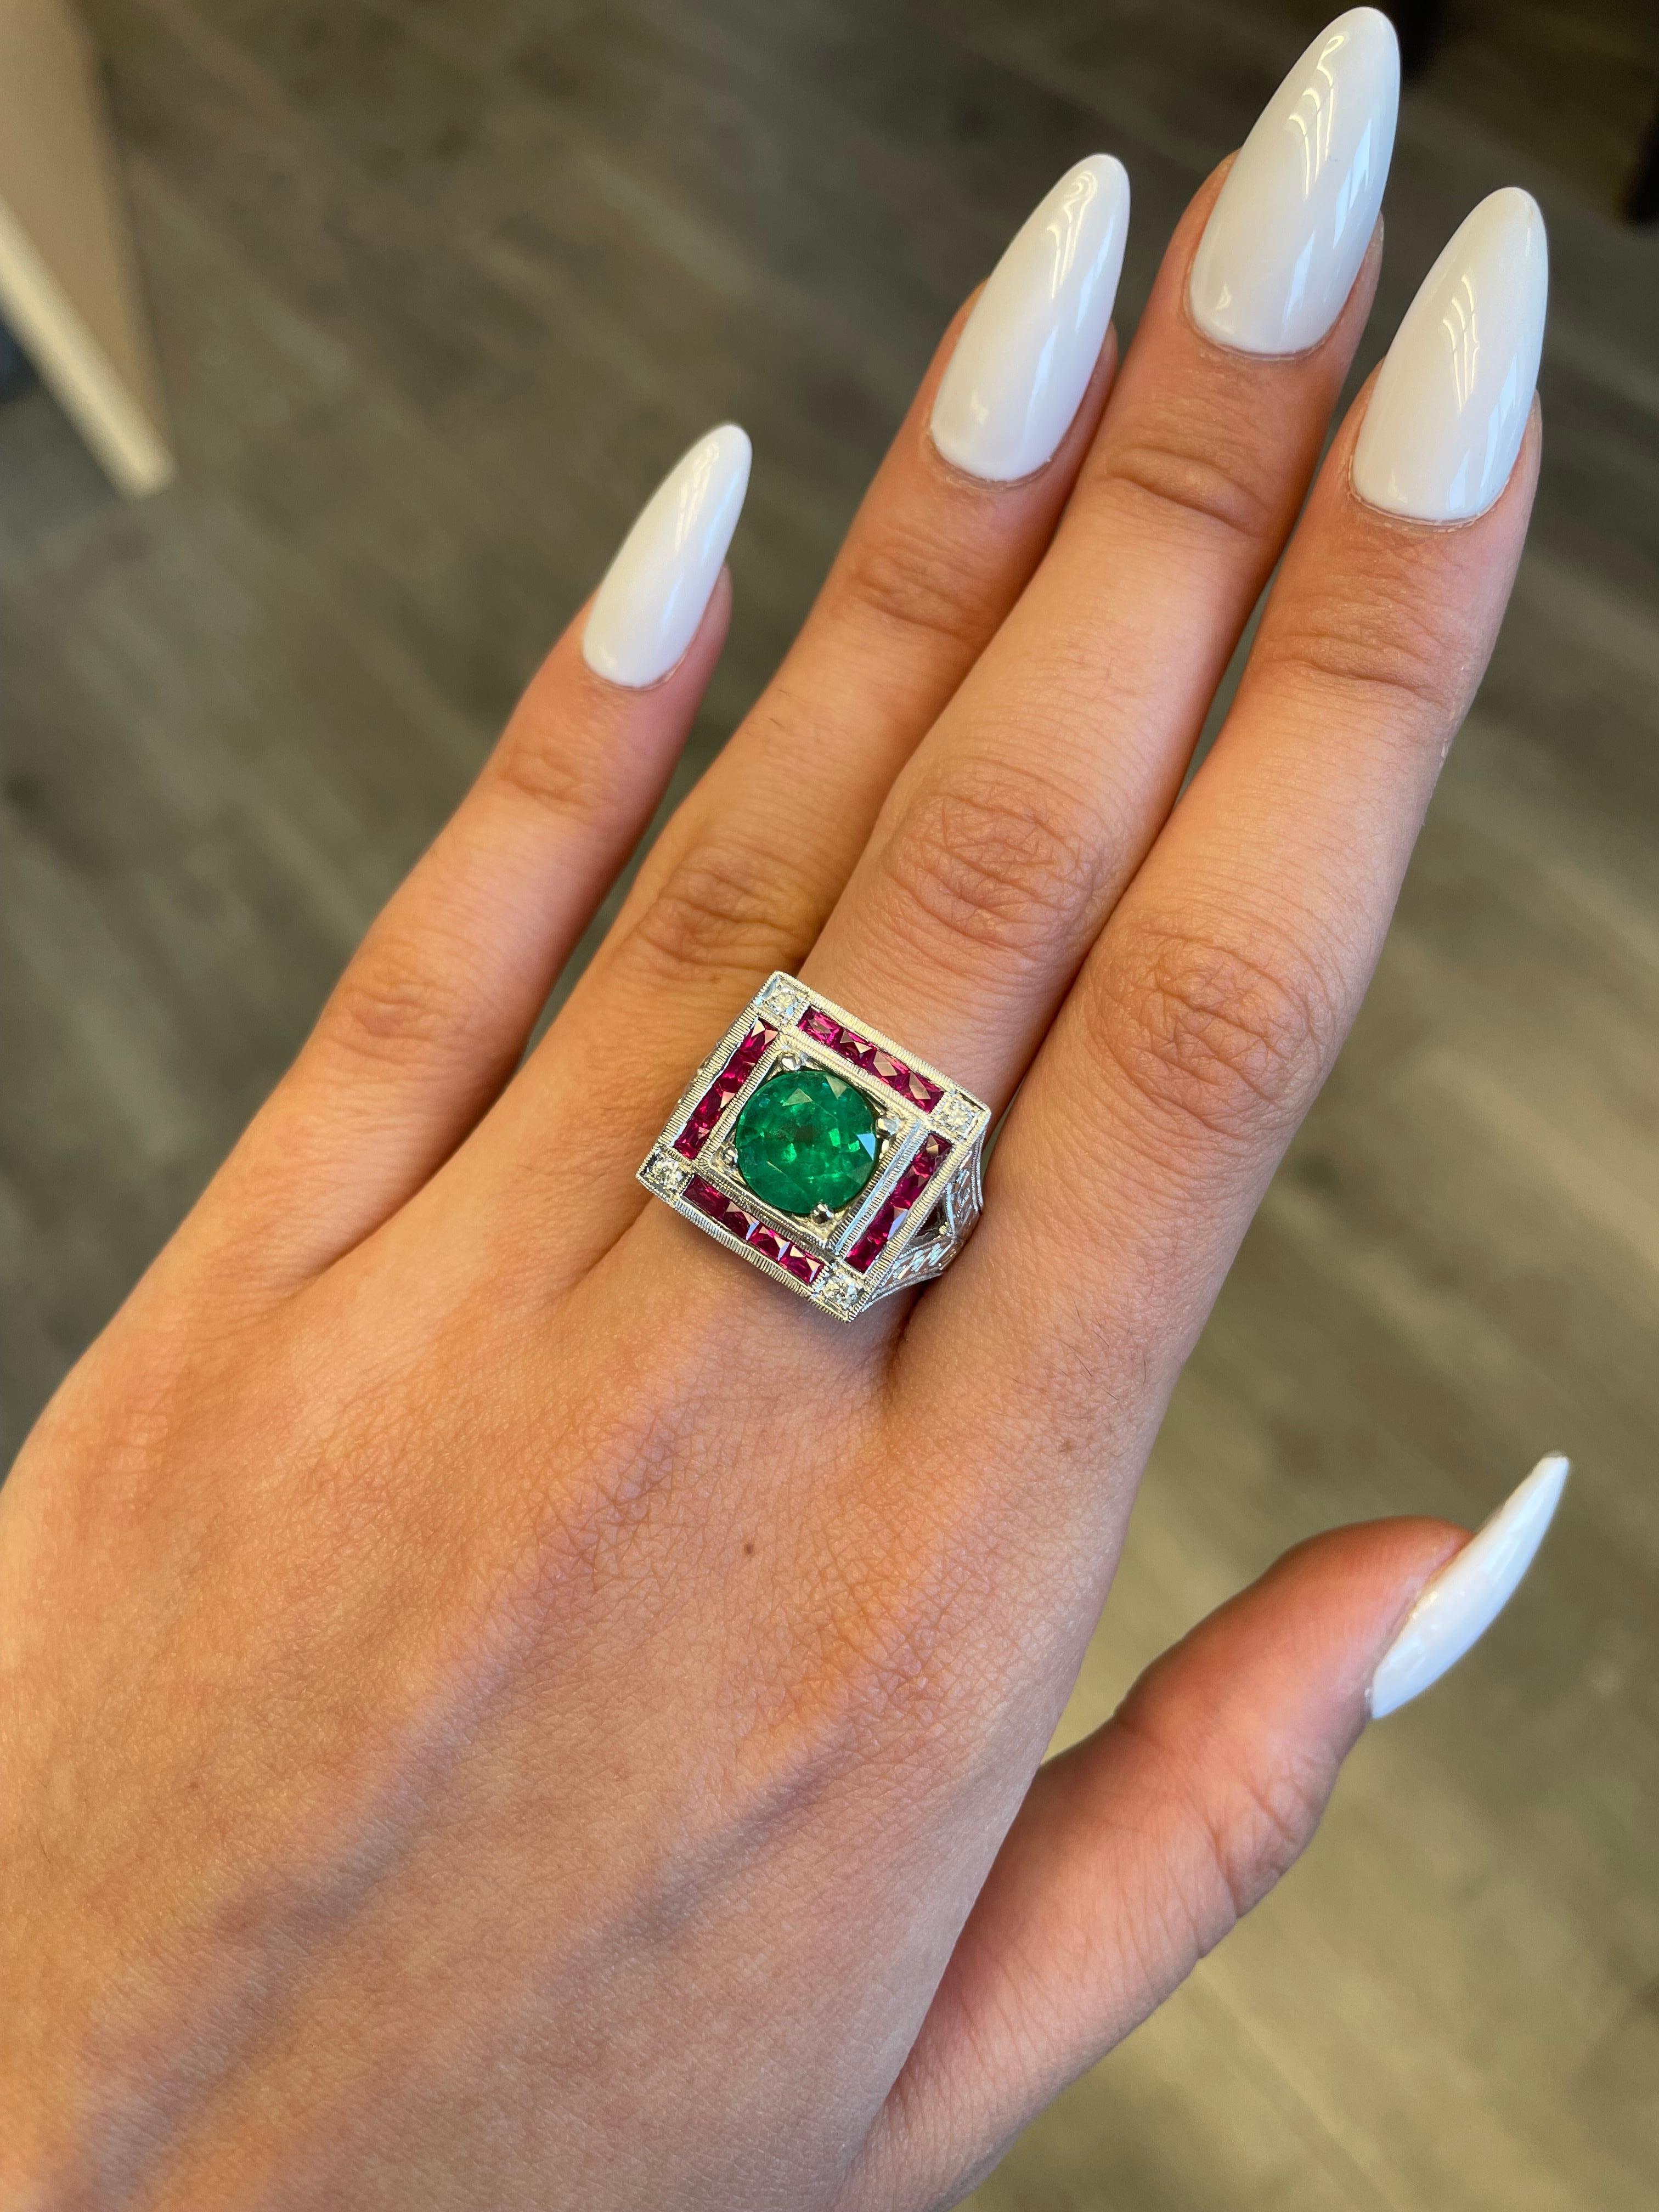 Lovely vintage inspired emerald with sapphires and diamond ring.
2.15 carat round emerald apx F2 complimented with 1.21ct of french cut rubies heat and 0.10ct of round brilliant diamonds. Approximately G/H color and SI clarity. 18-karat white gold